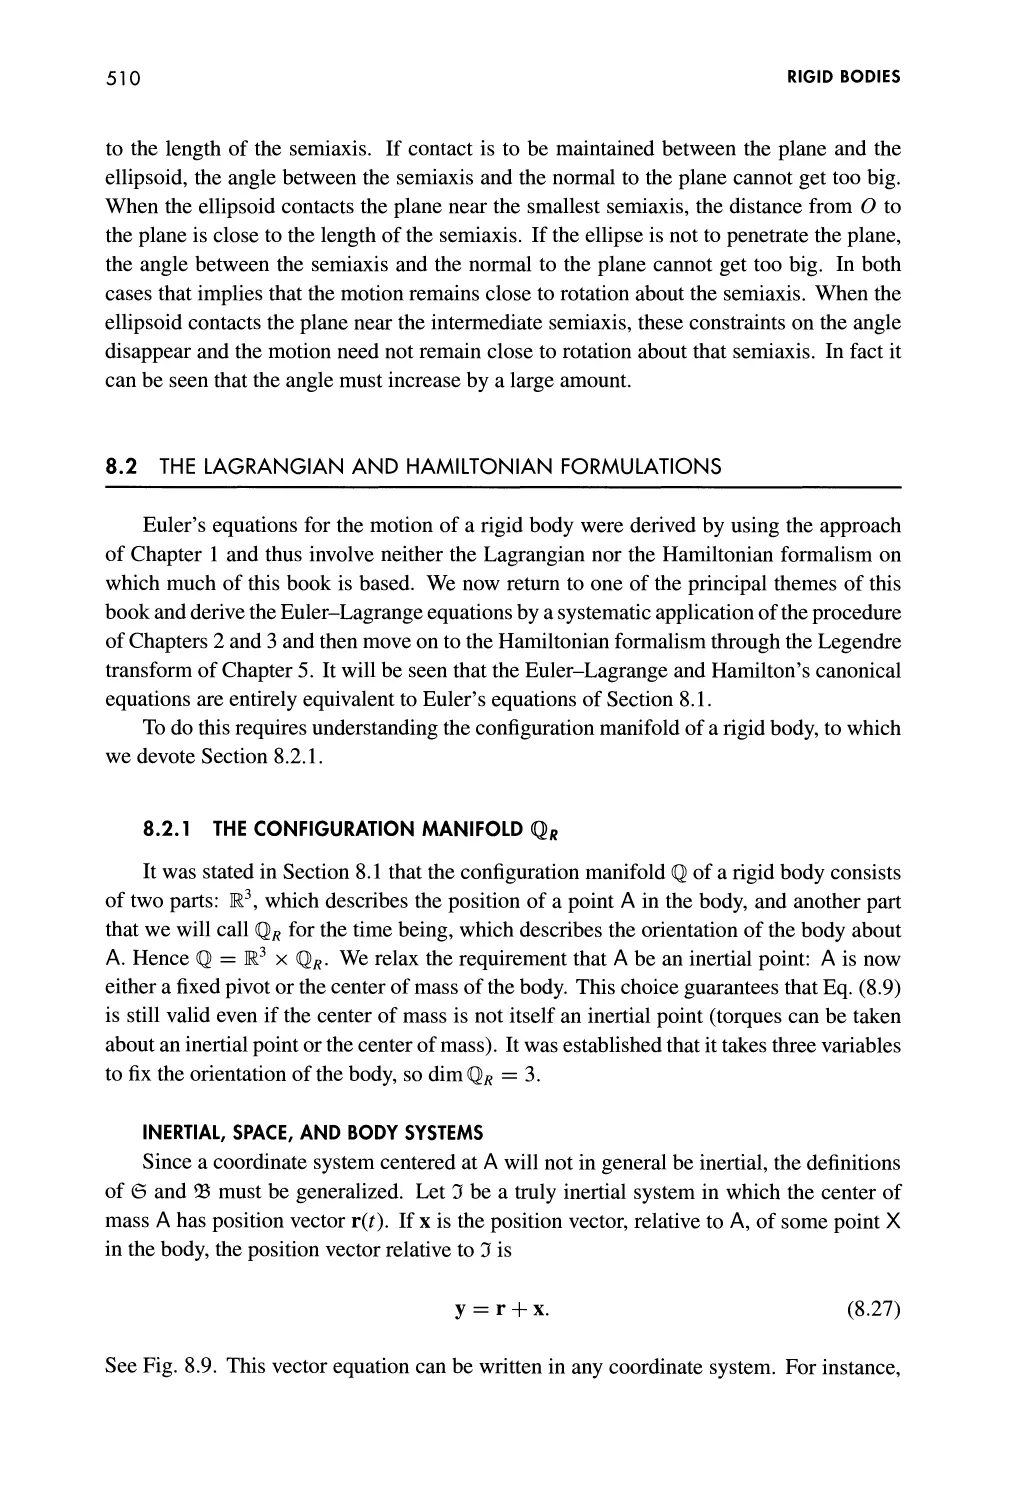 8.2 The Lagrangian and Hamiltonian Formulations
Inertial, Space, and Body Systems